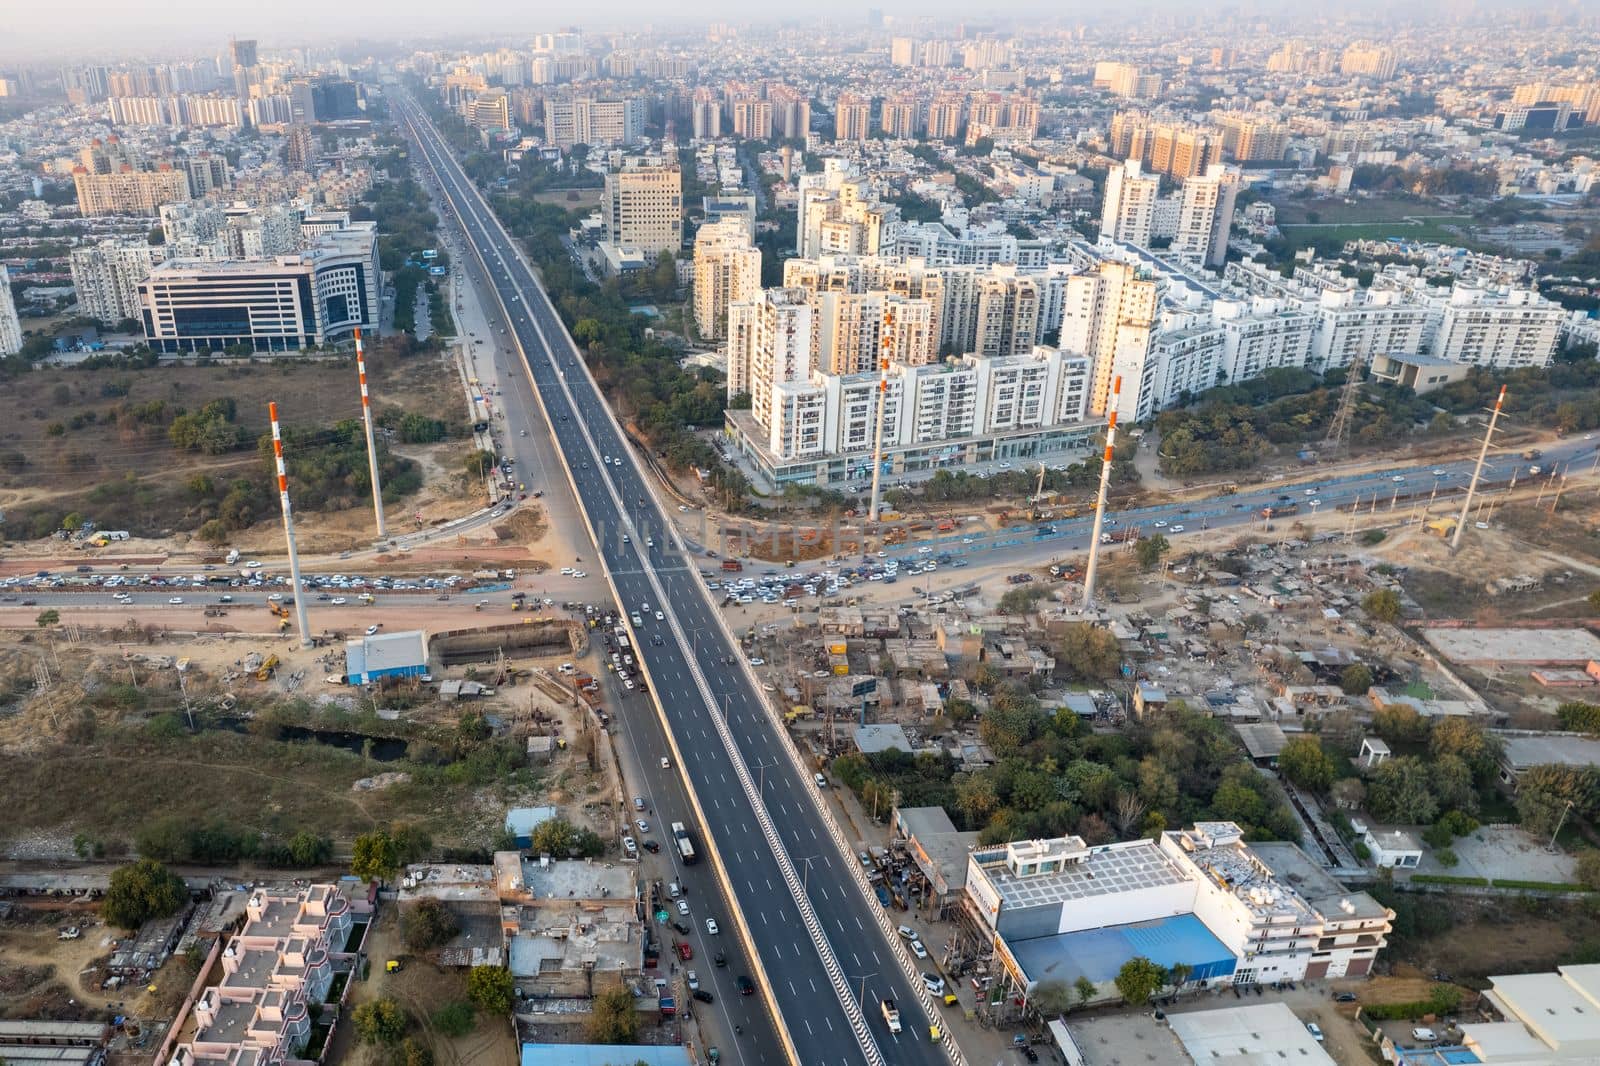 aerial drone still shot showing busy sohna elevated highway toll road with traffic stuck at interesction due to road construction of bridge or underpass by Shalinimathur